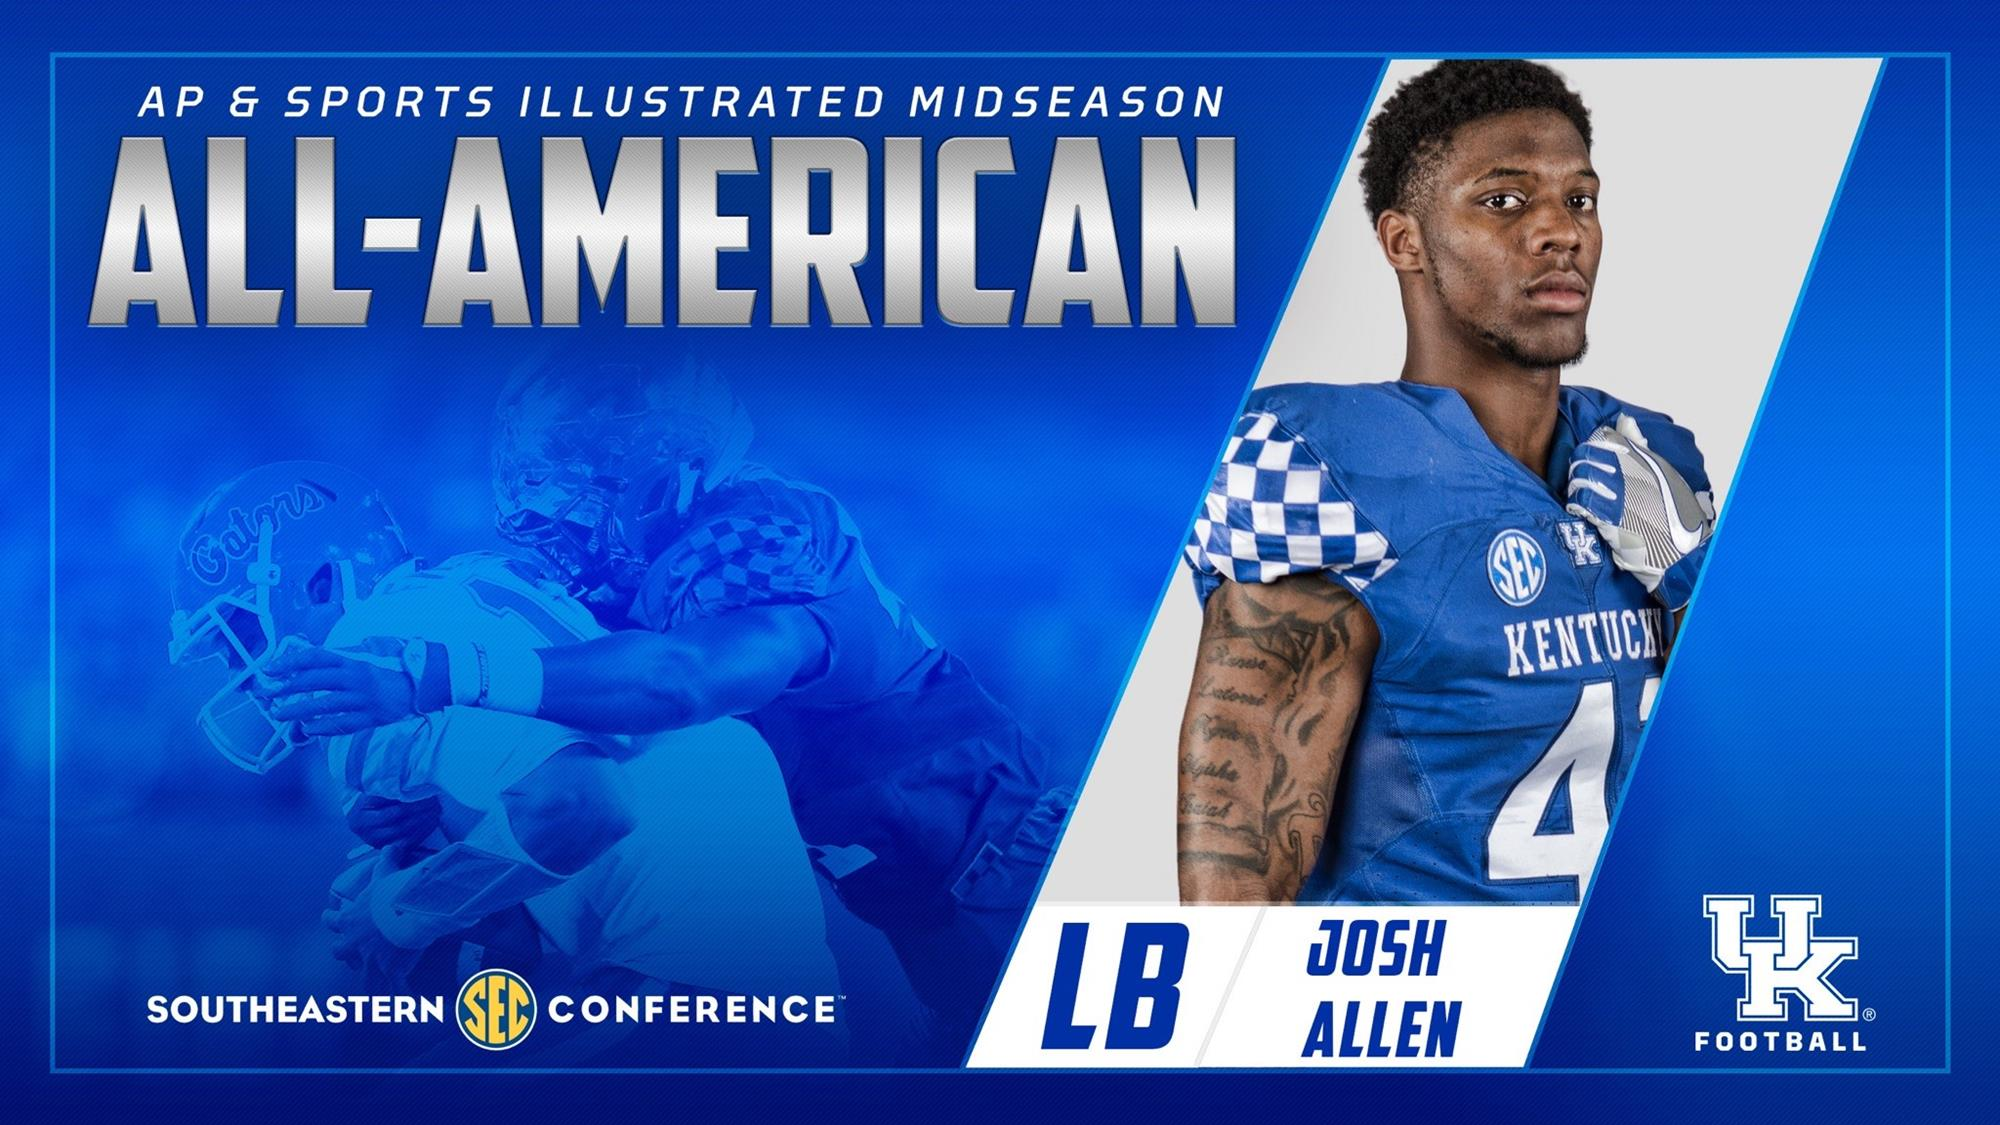 UK’s Josh Allen Named AP and Sports Illustrated Second-Team Midseason All-American